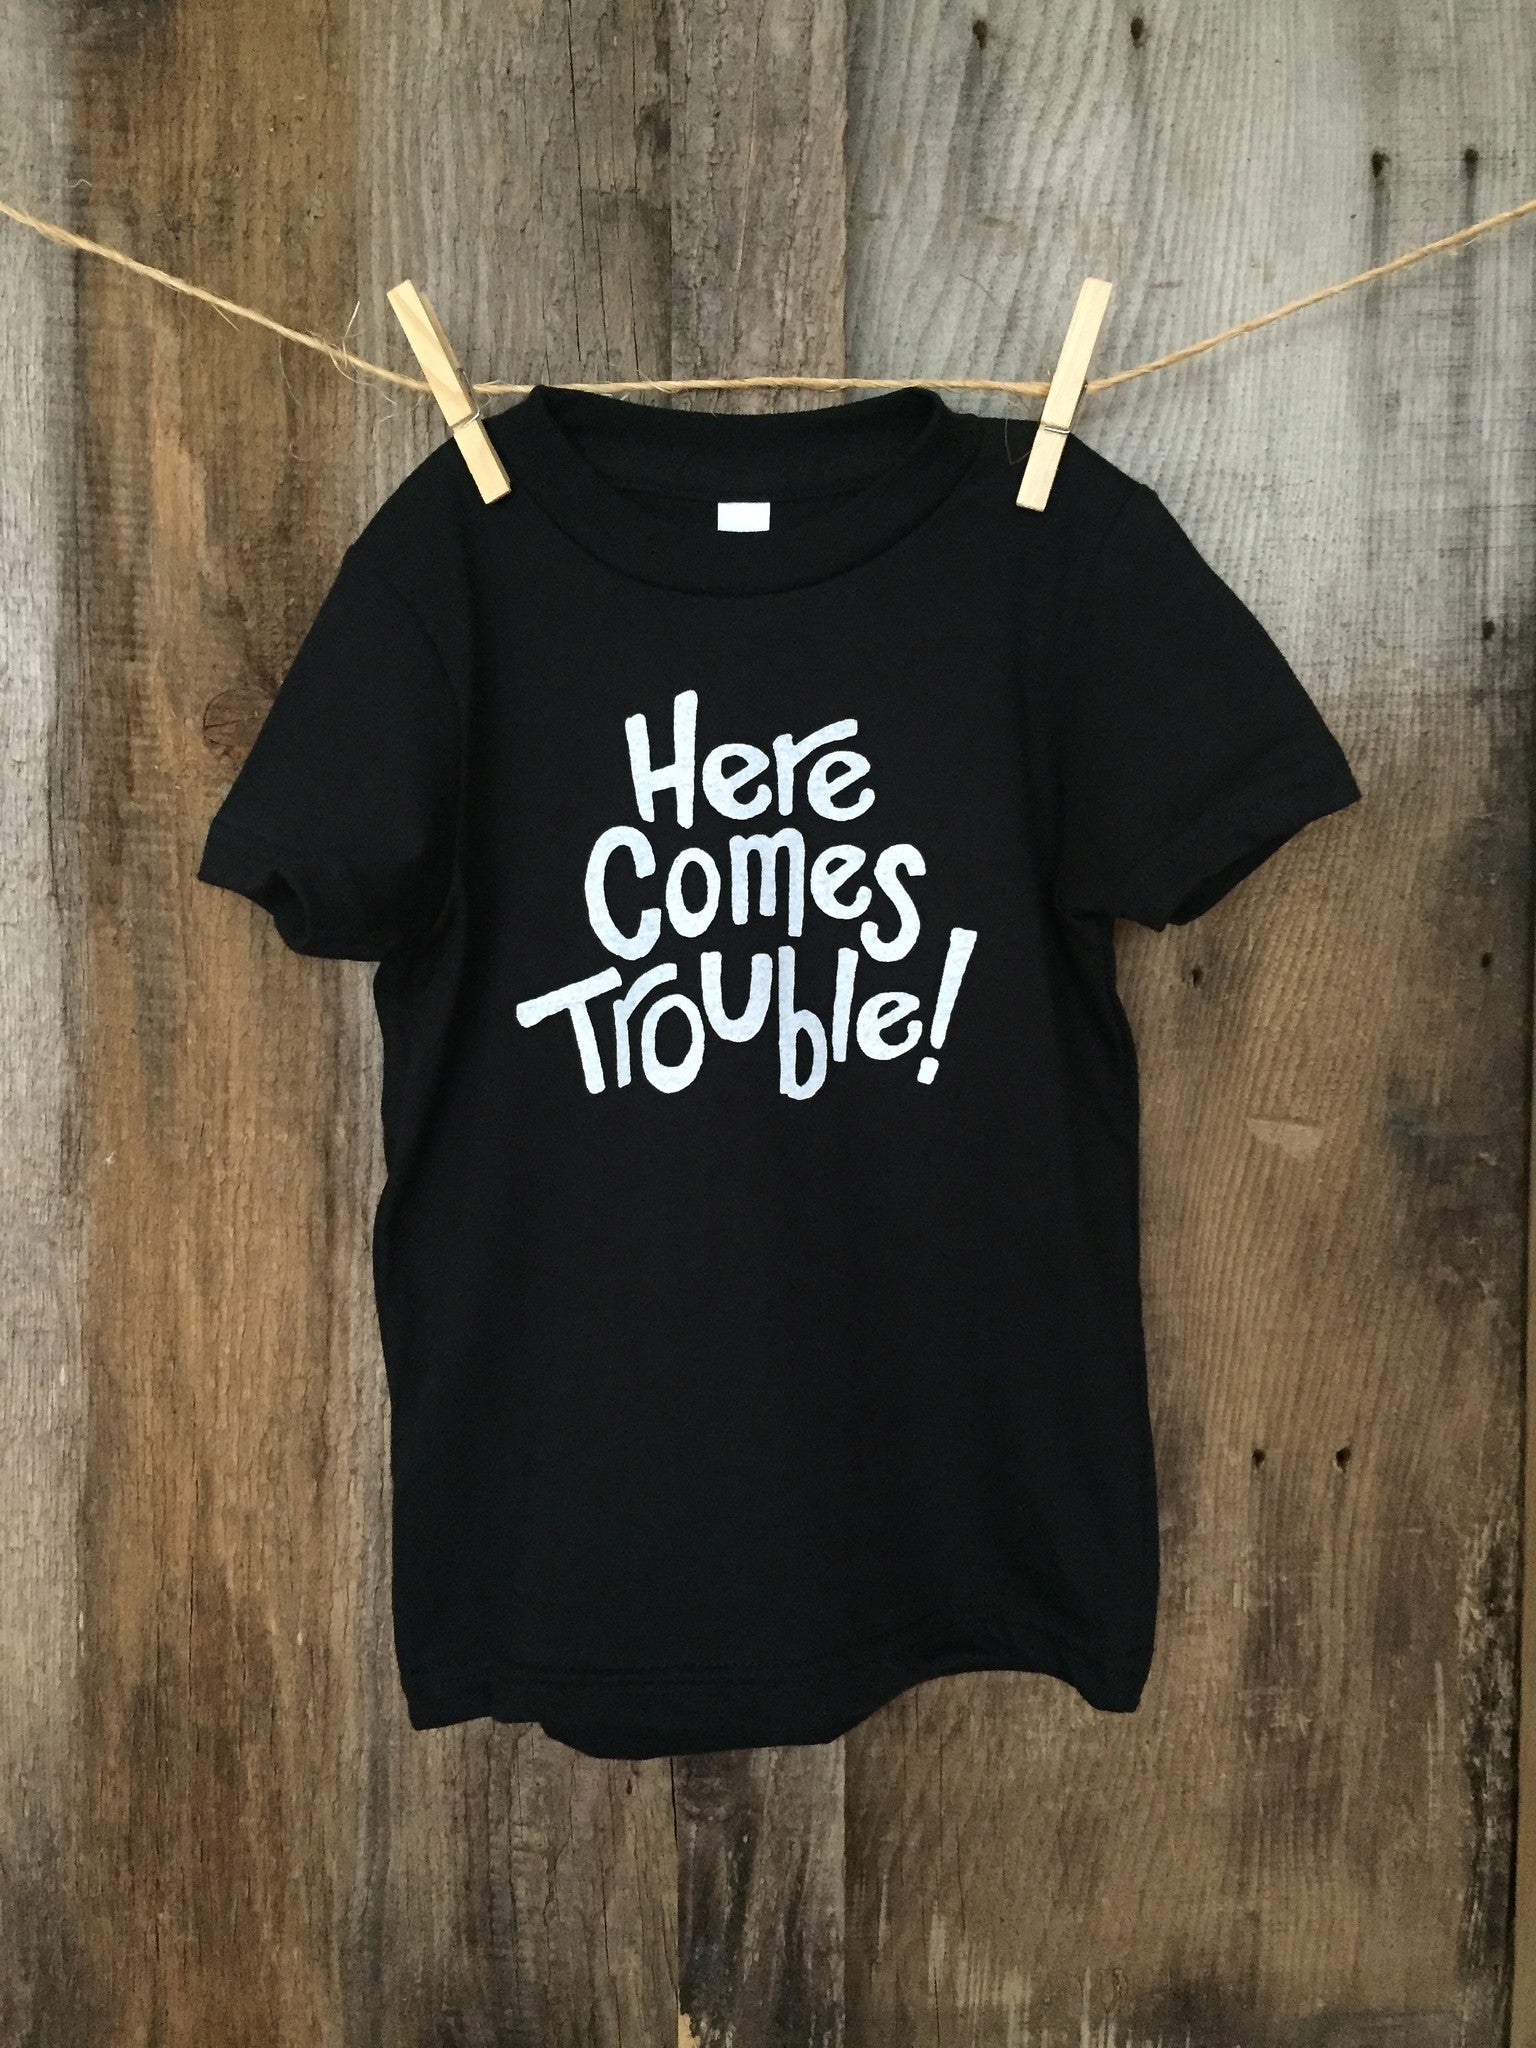 Bandit Kid "Here Comes Trouble" Tee Blk/White